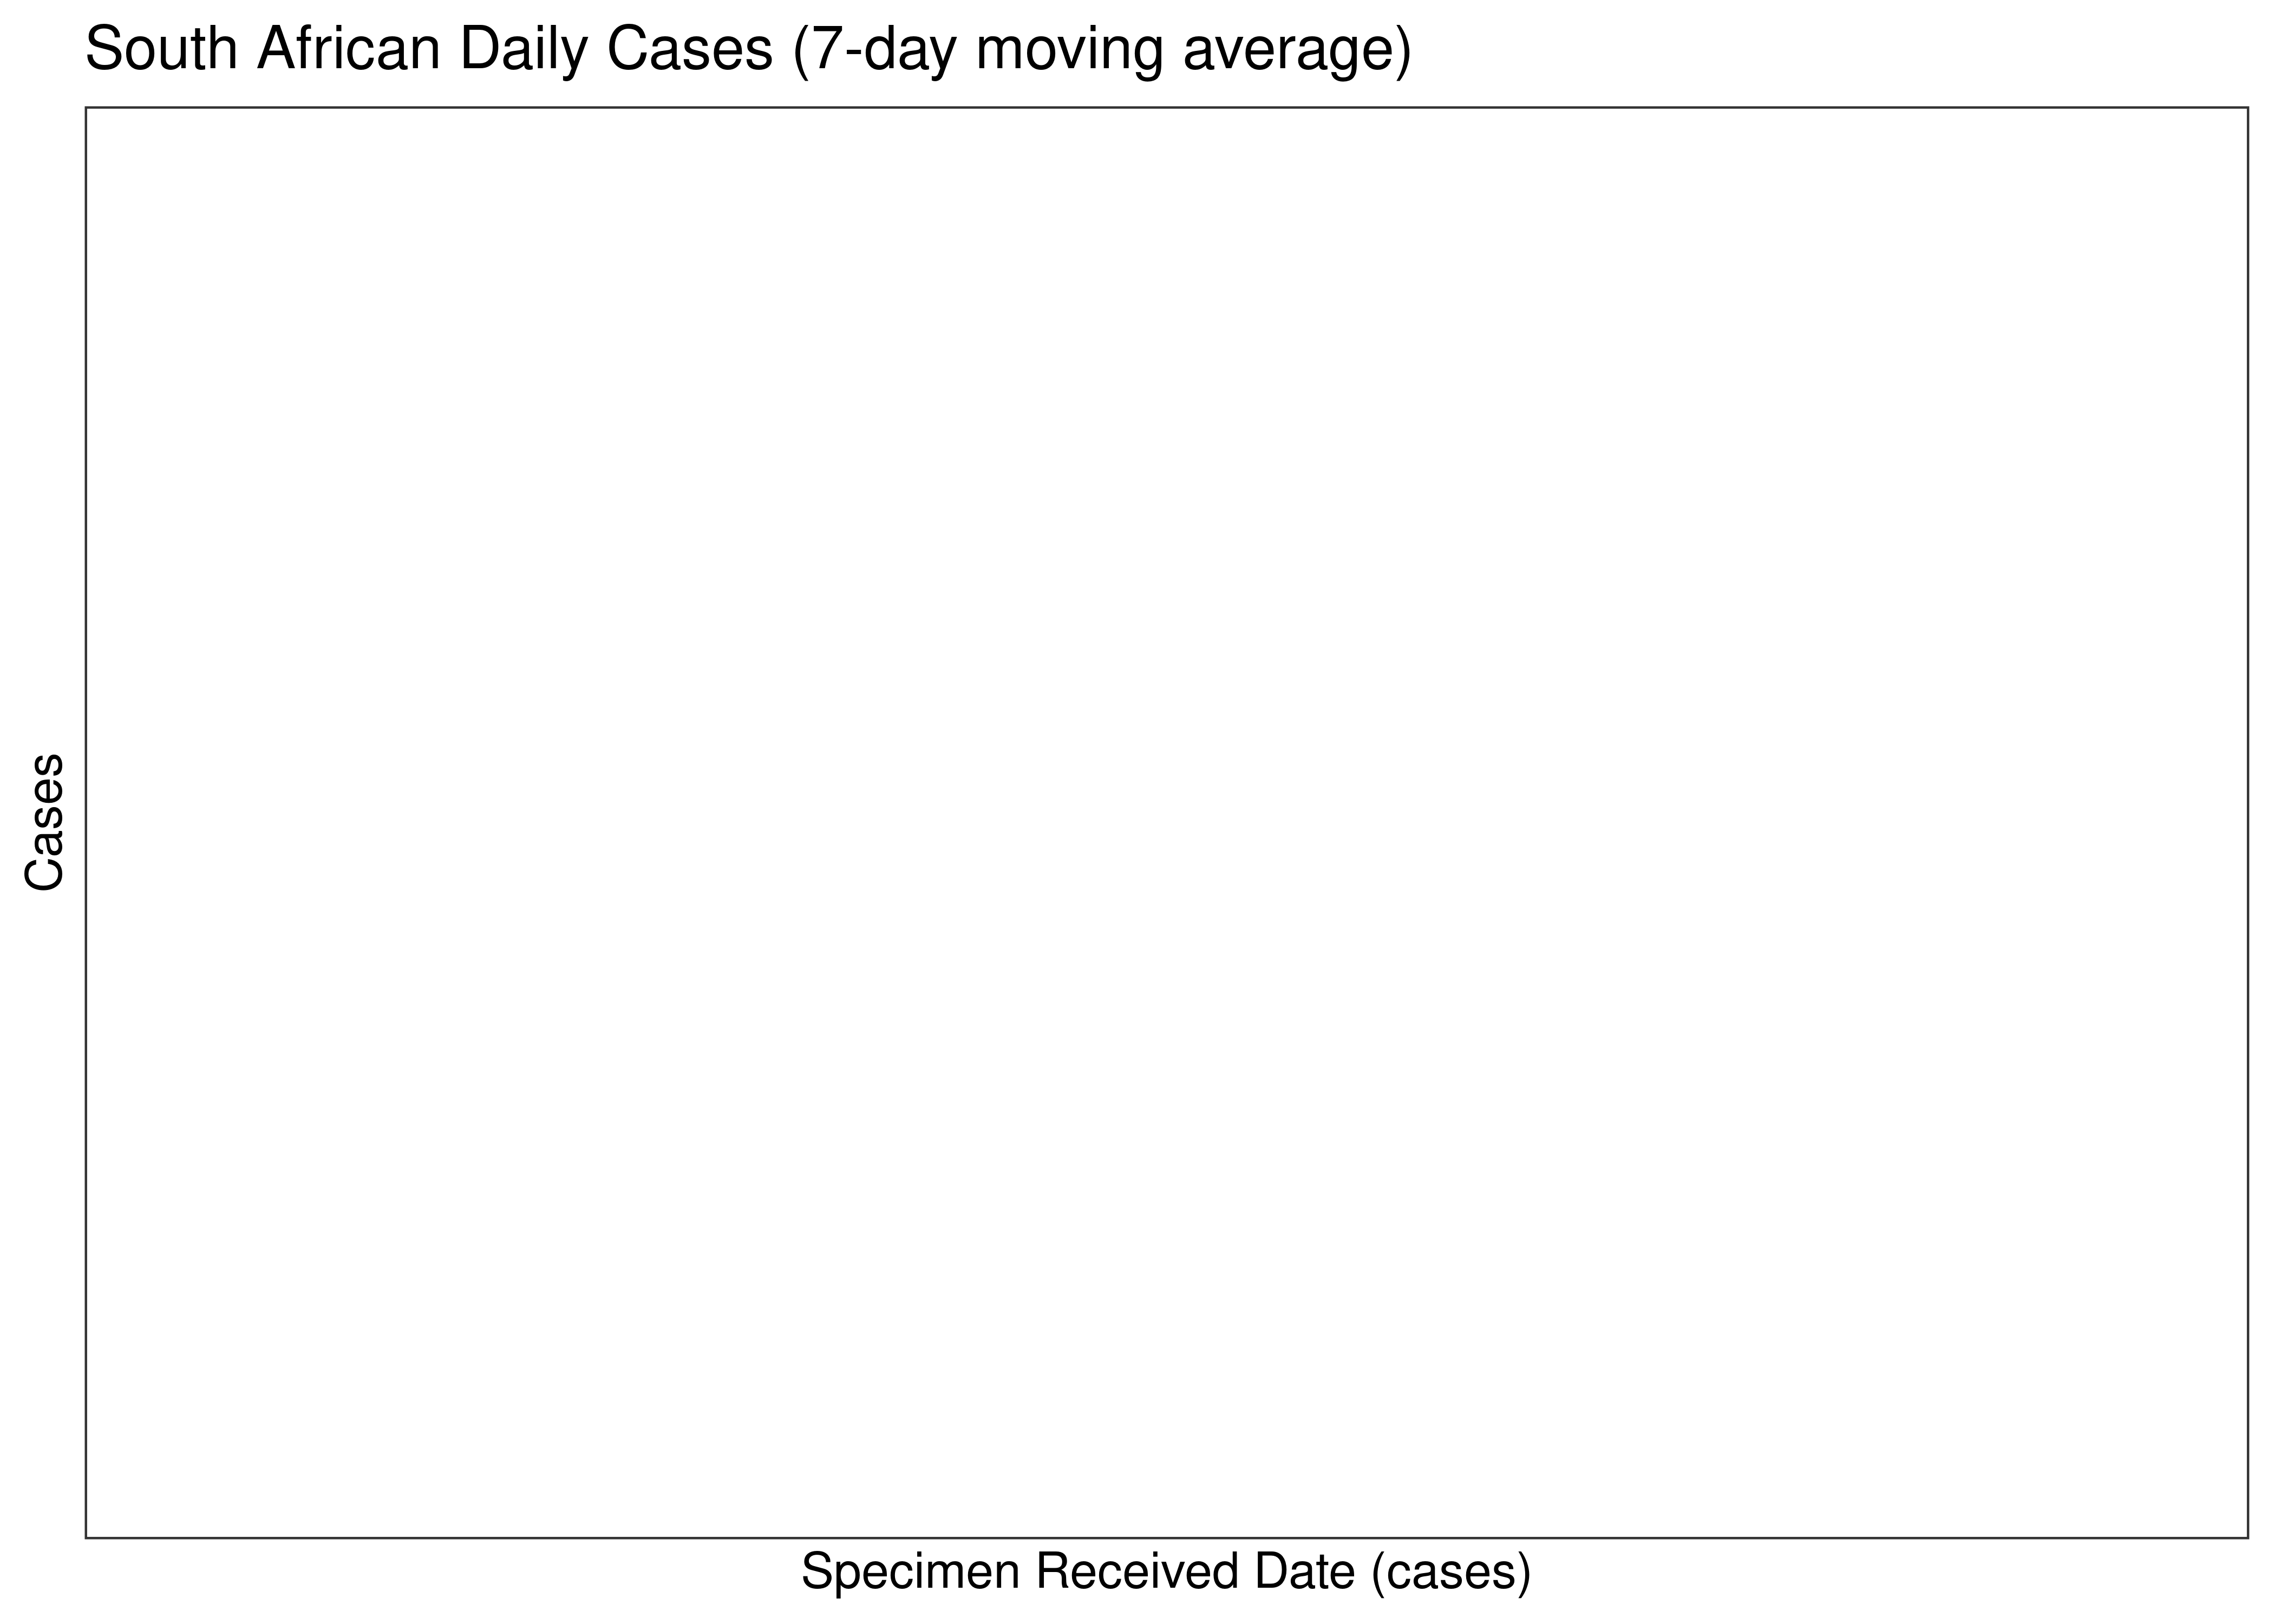 South African Daily Cases for Last 30-days (7-day moving average)